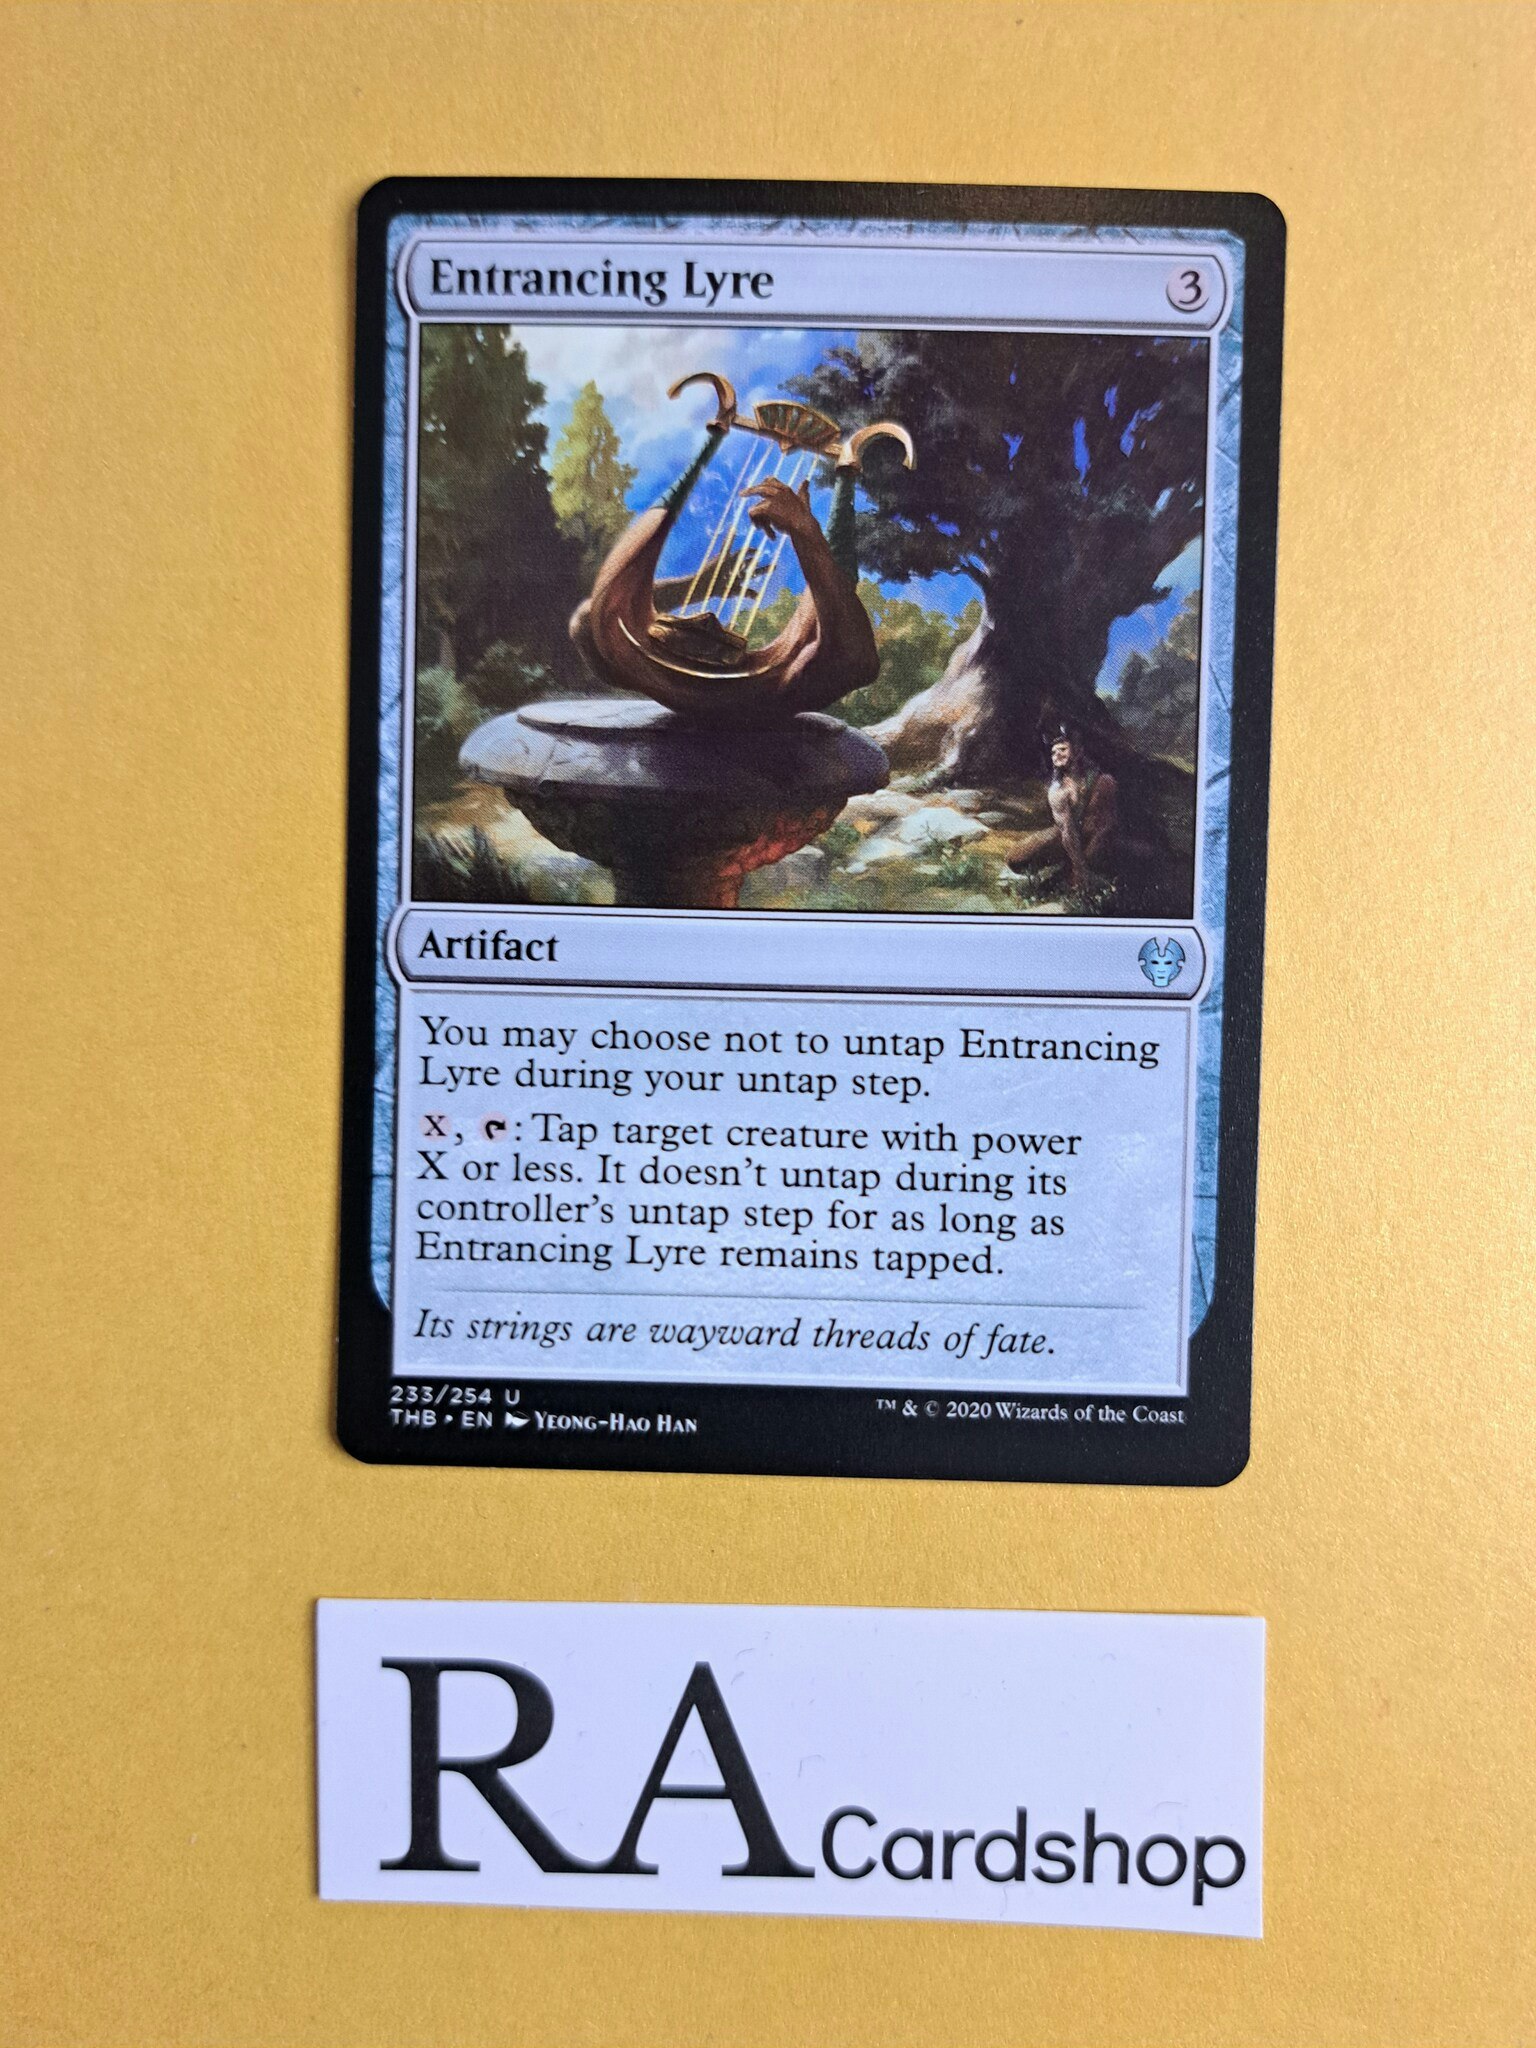 Entrancing Lyre Uncommon 233/254 Theros Beyond Death Magic the Gathering